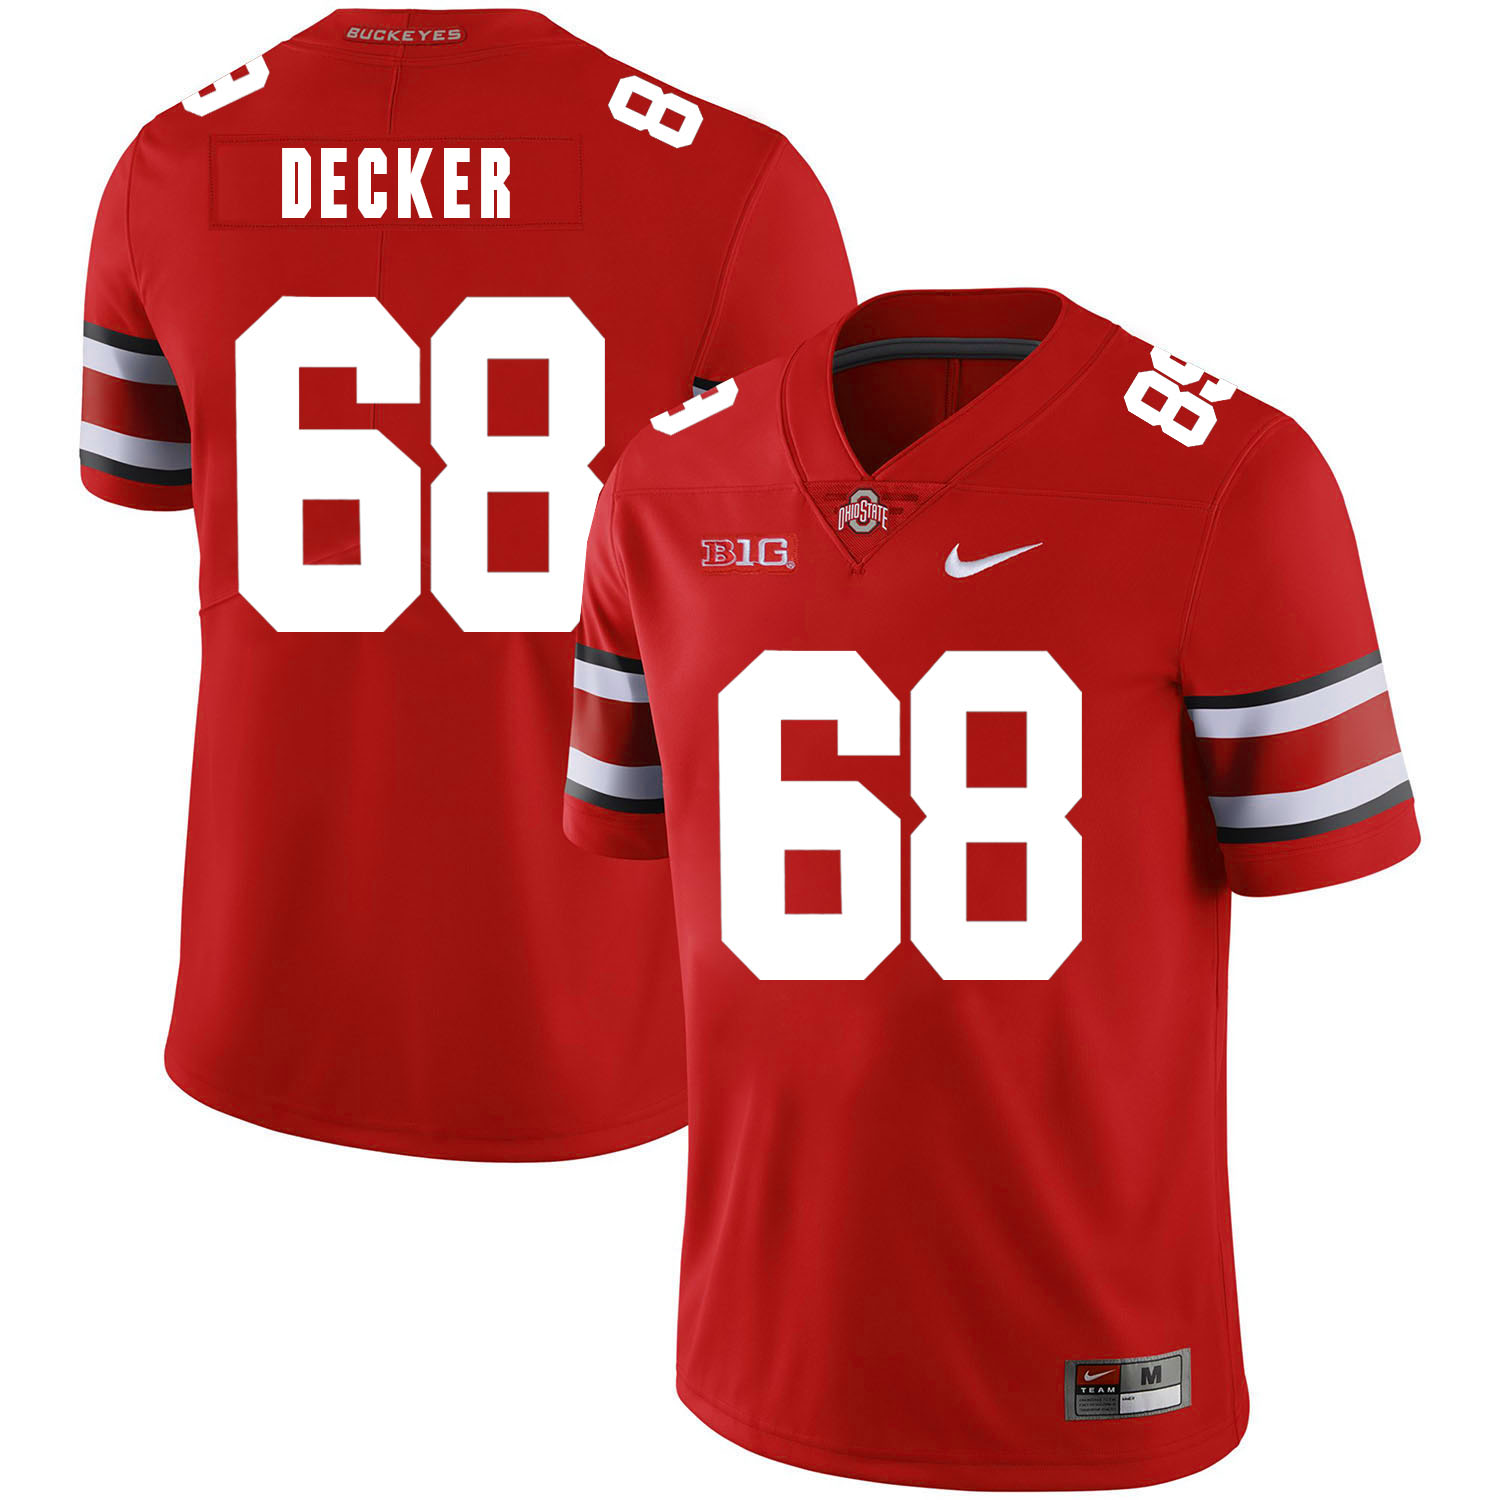 Ohio State Buckeyes 68 Taylor Decker Red Nike College Football Jersey